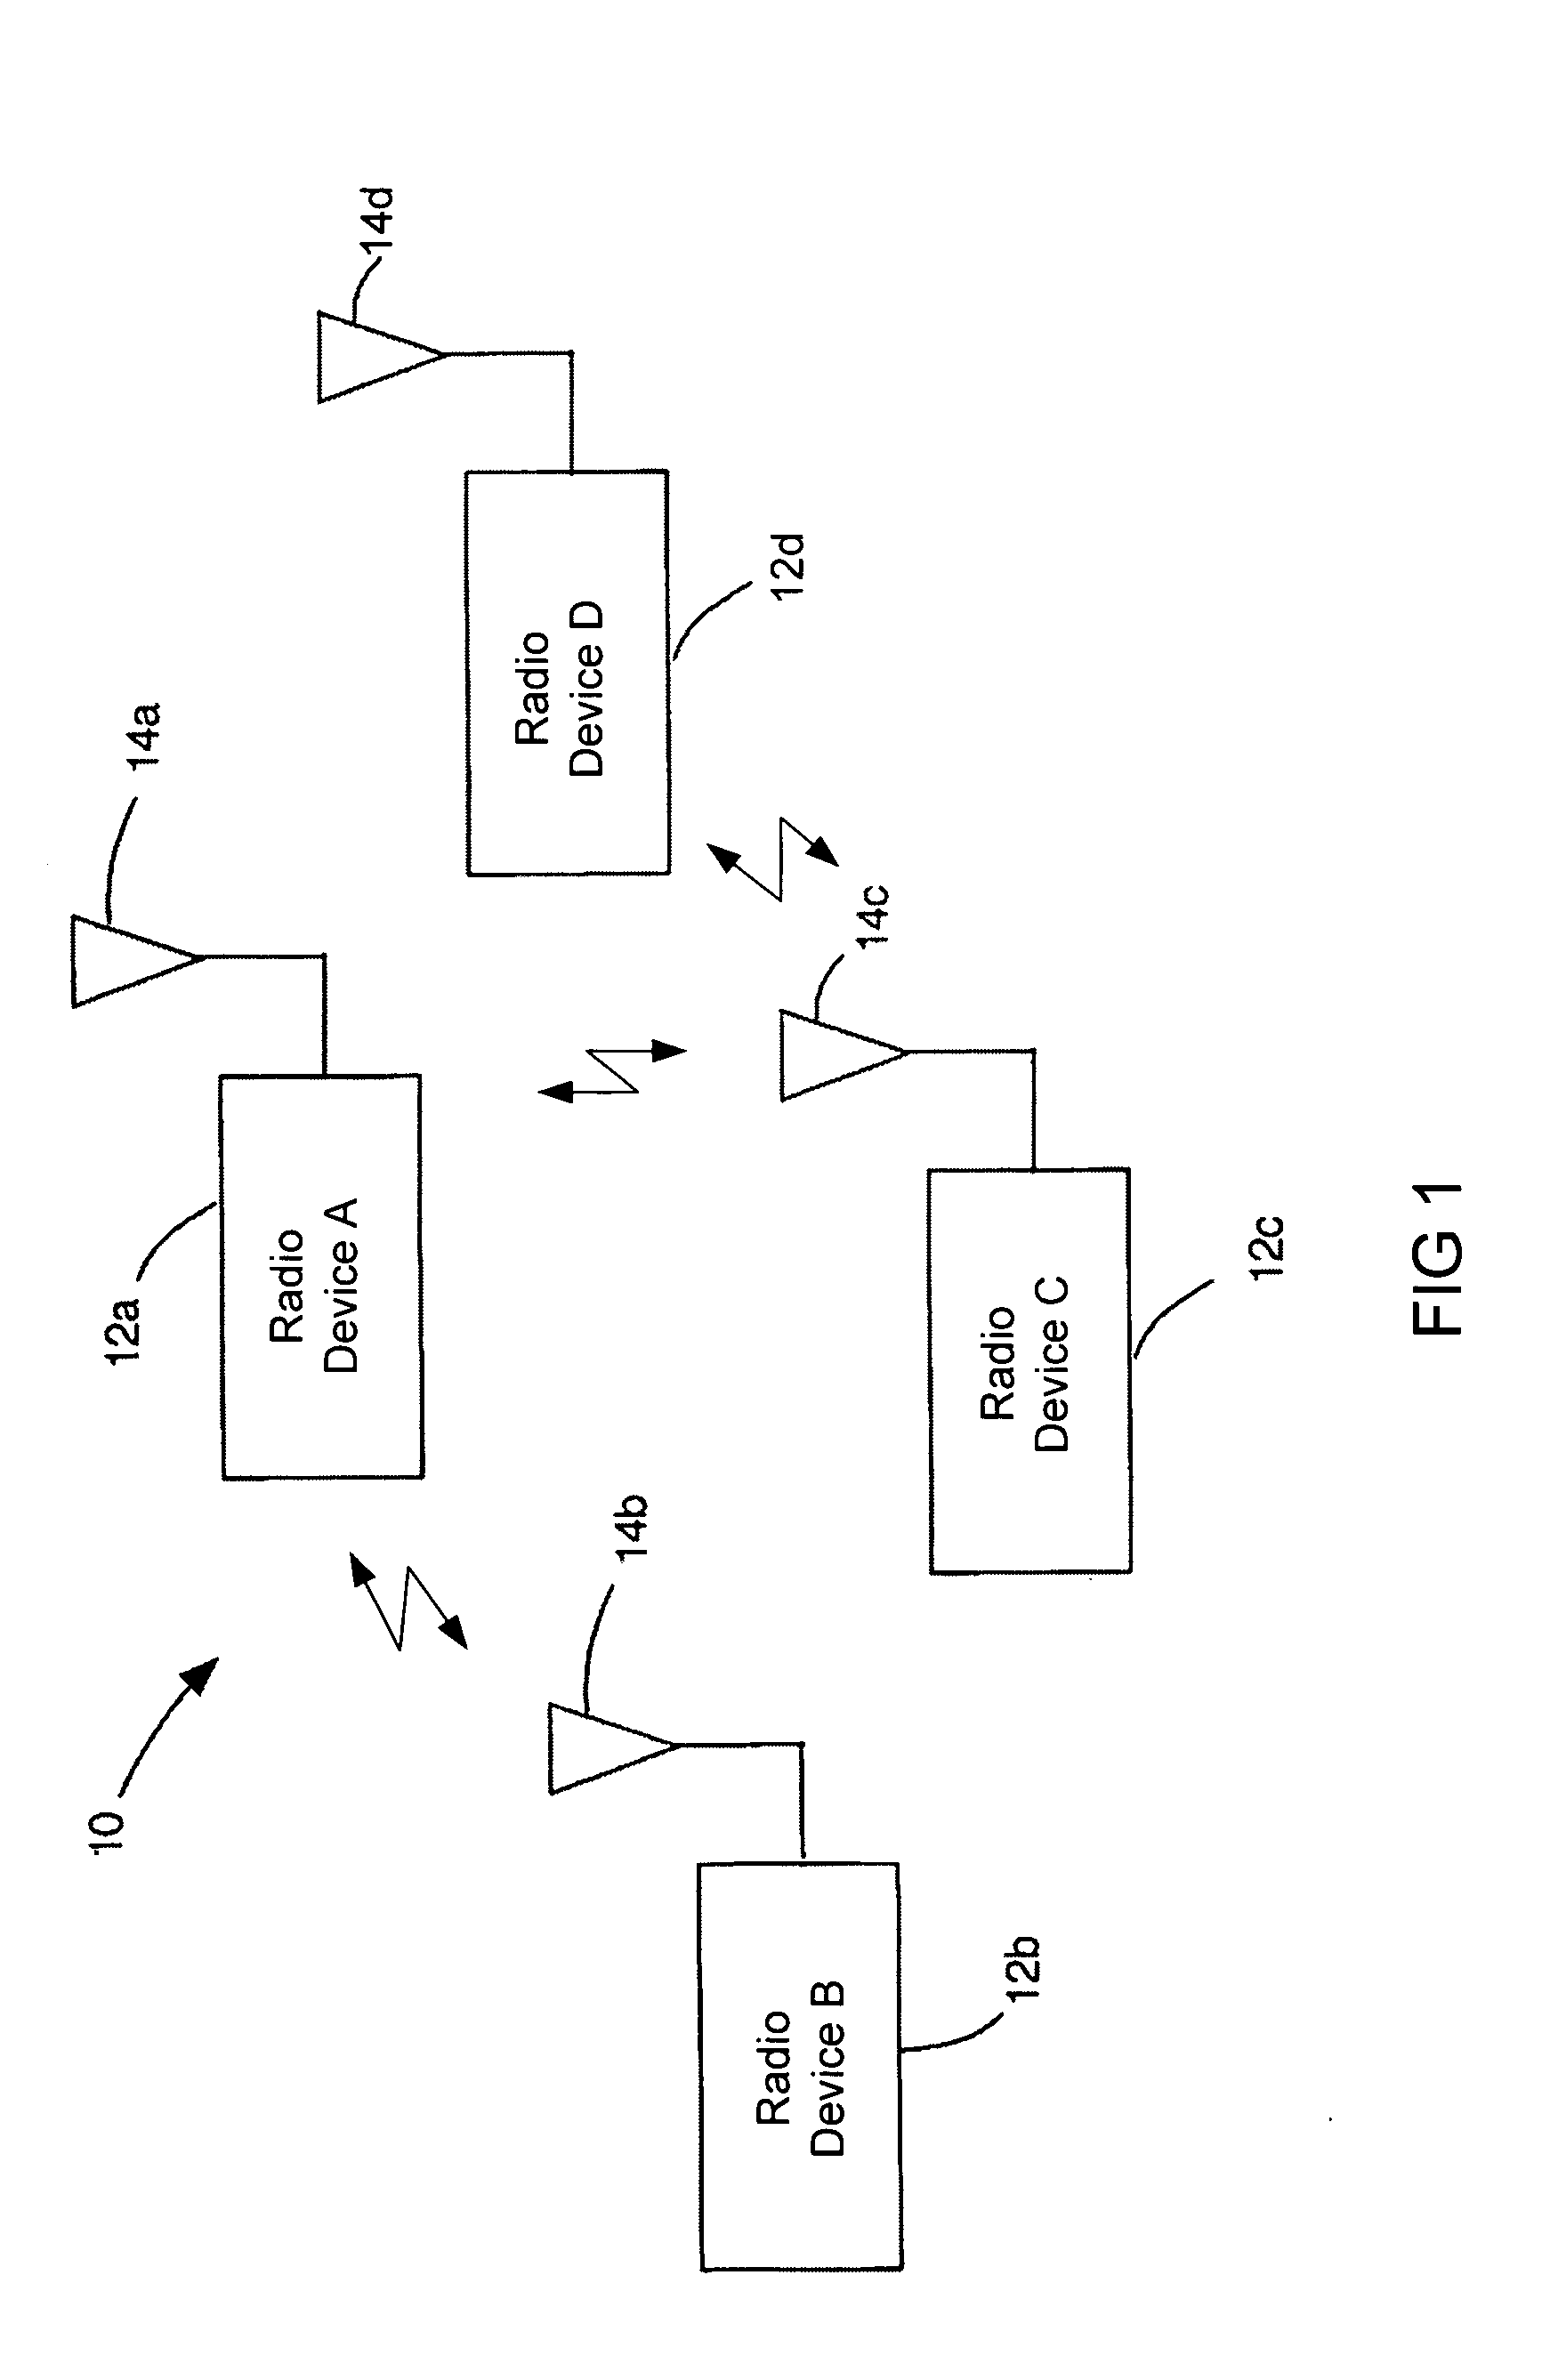 Ultra wide band communication systems and methods